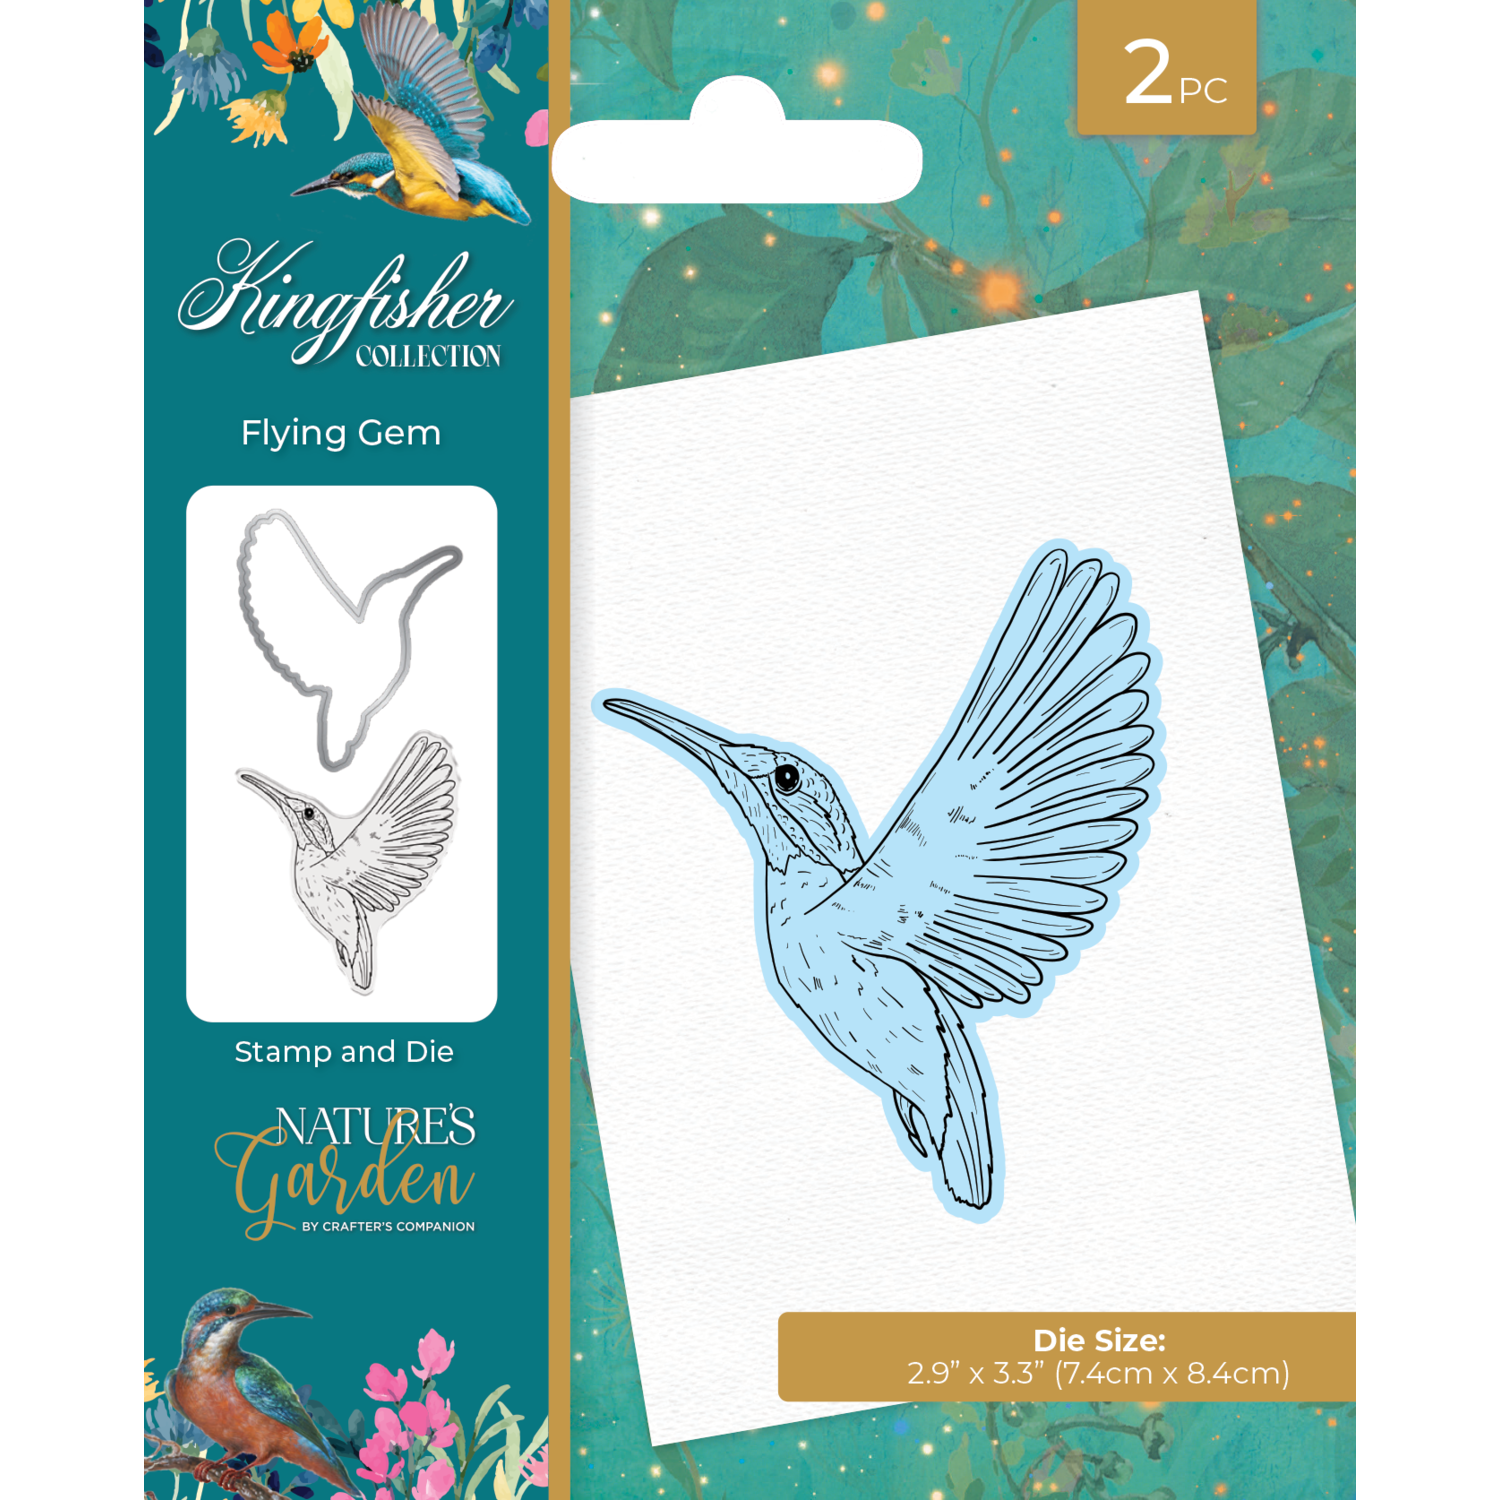 Kingfisher collection stamp die flying gem ng